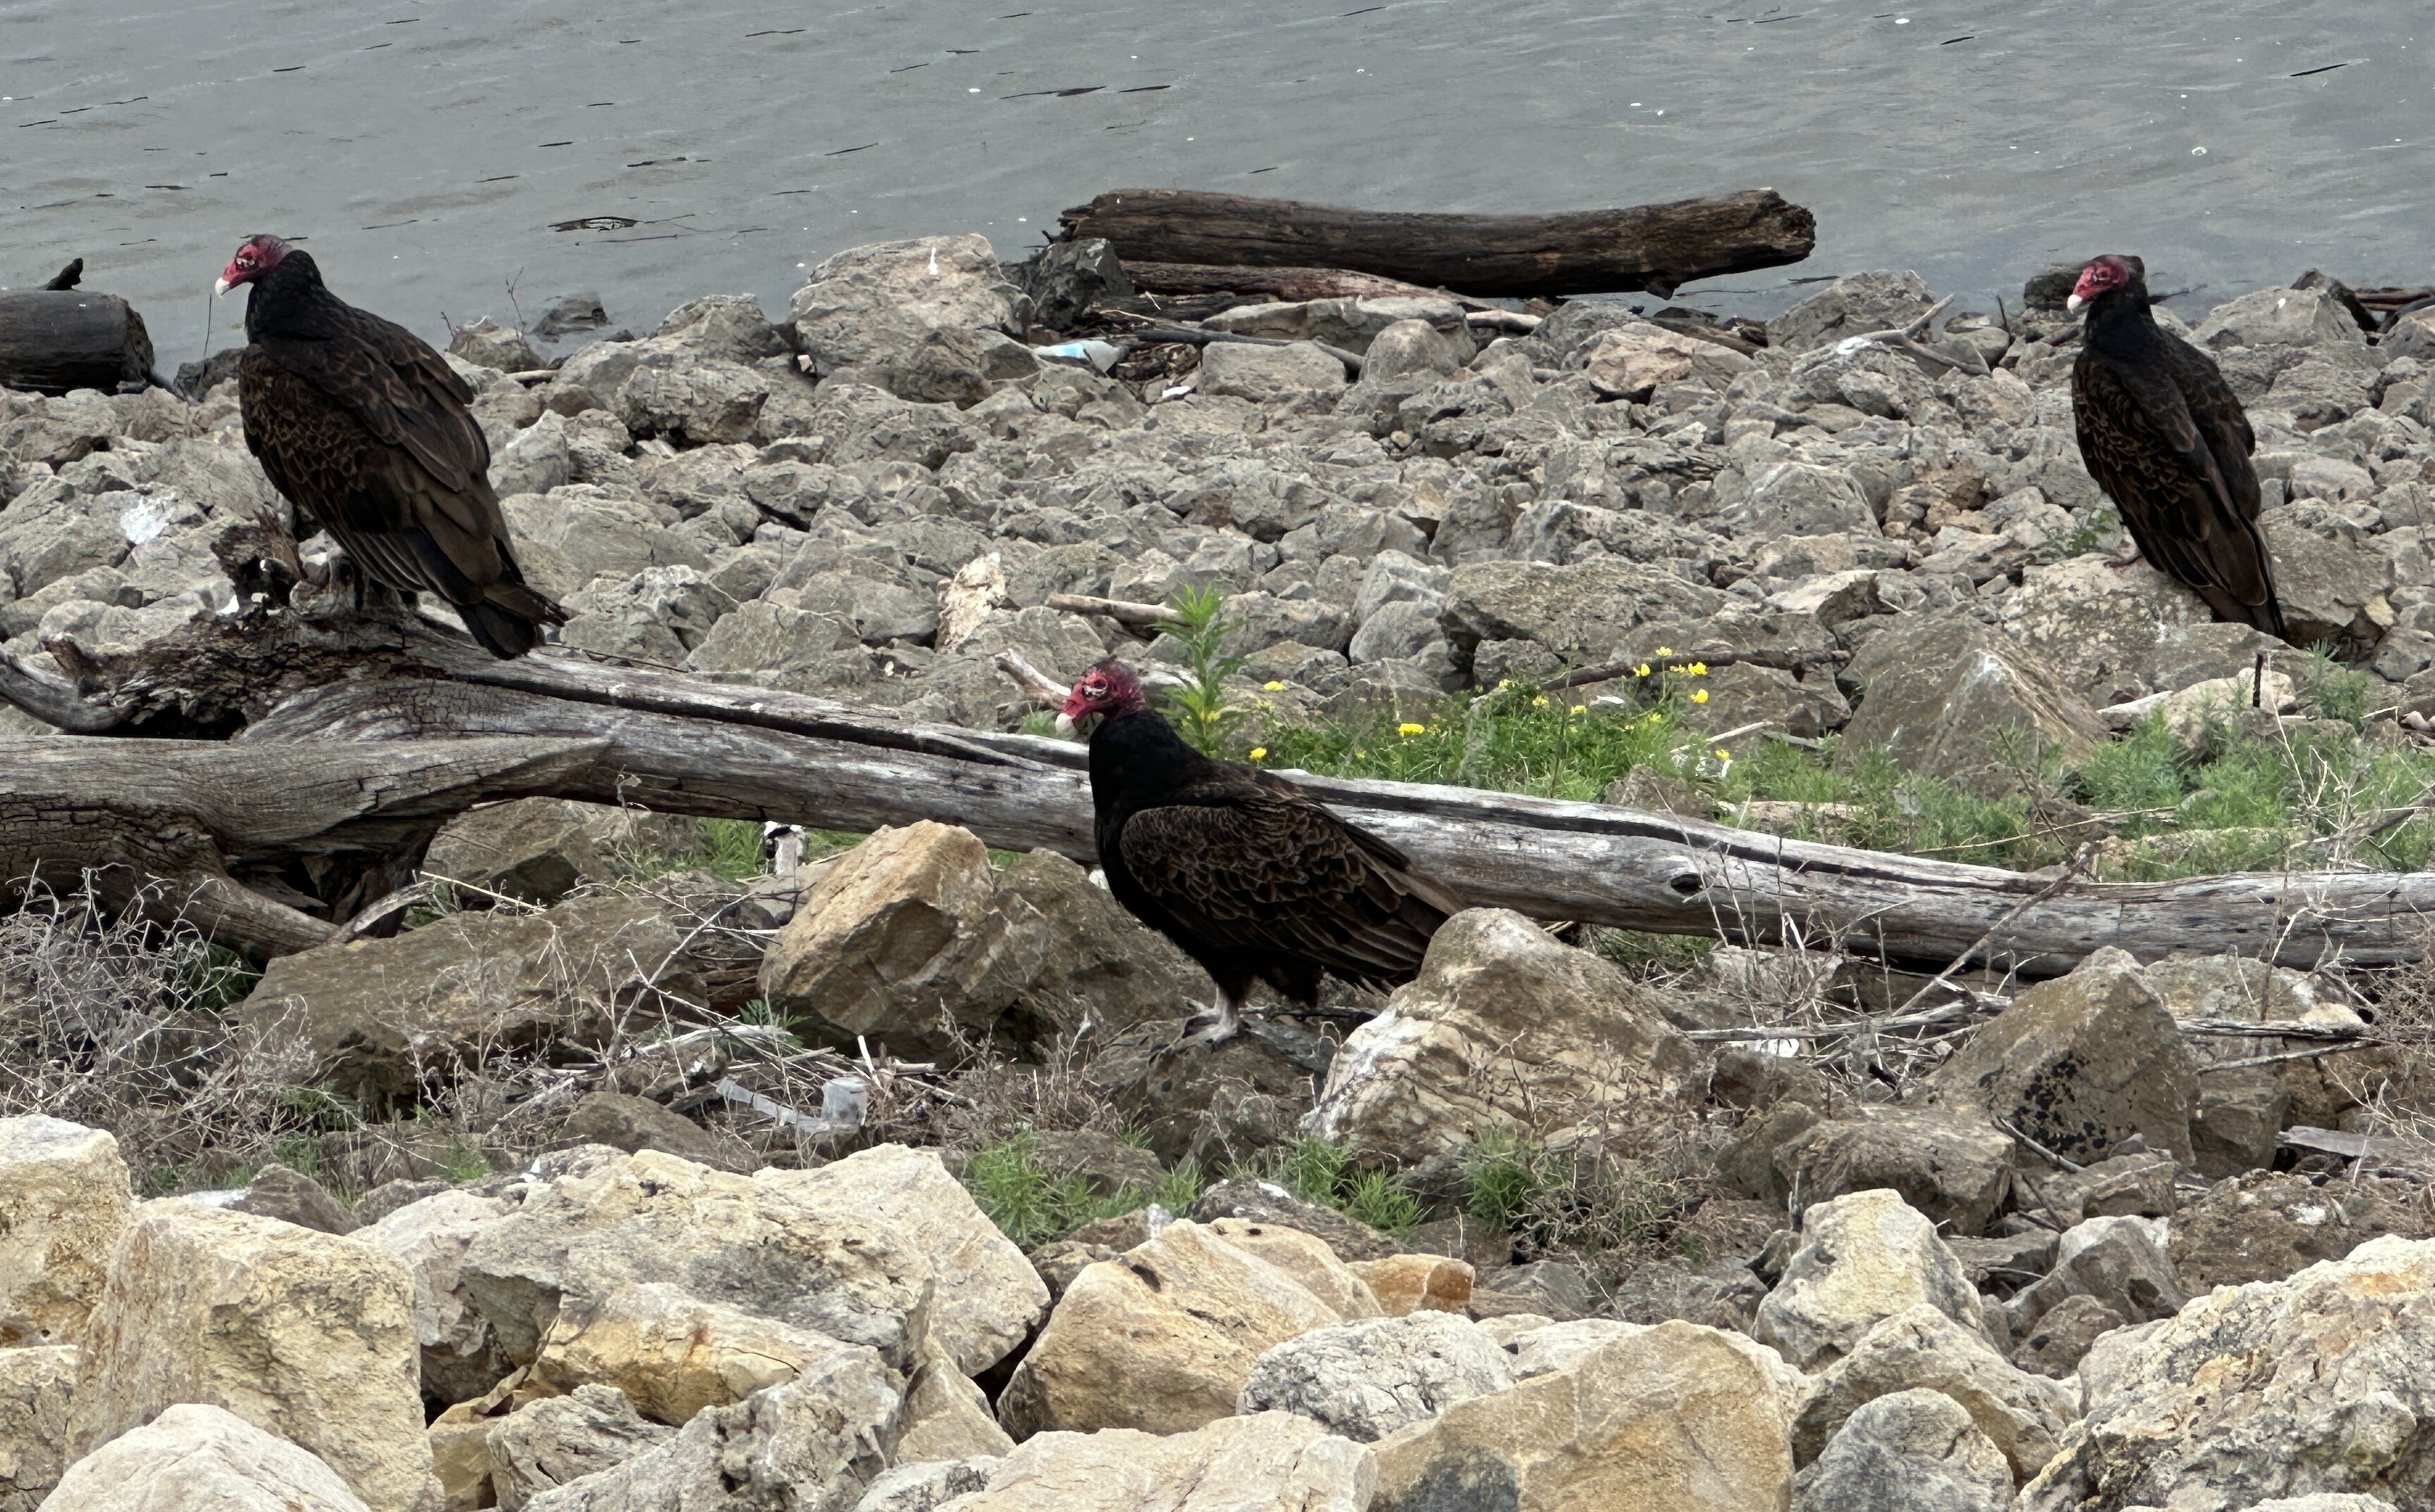 Three turkey vultures on the stony shore of the Mississippi River in South Saint Paul, Minnesota